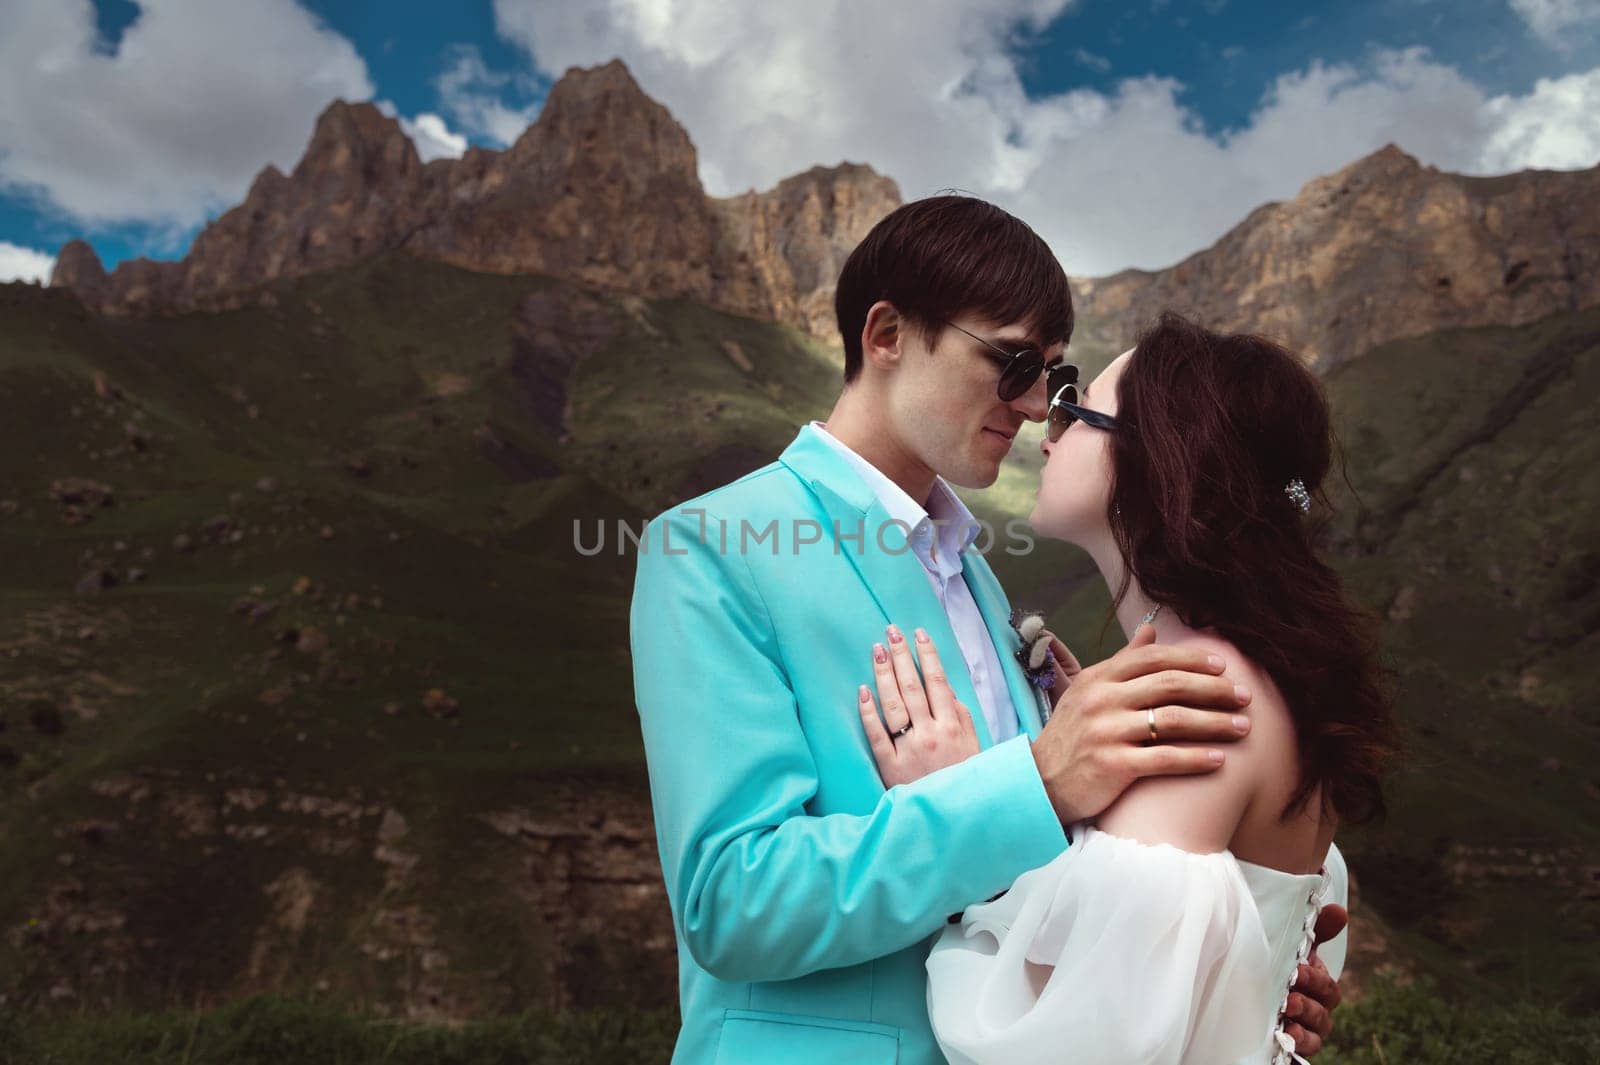 Beautiful wedding couple laughs and plans to kiss against the backdrop of mountains and cloudy sky. Portrait of happy newlyweds.